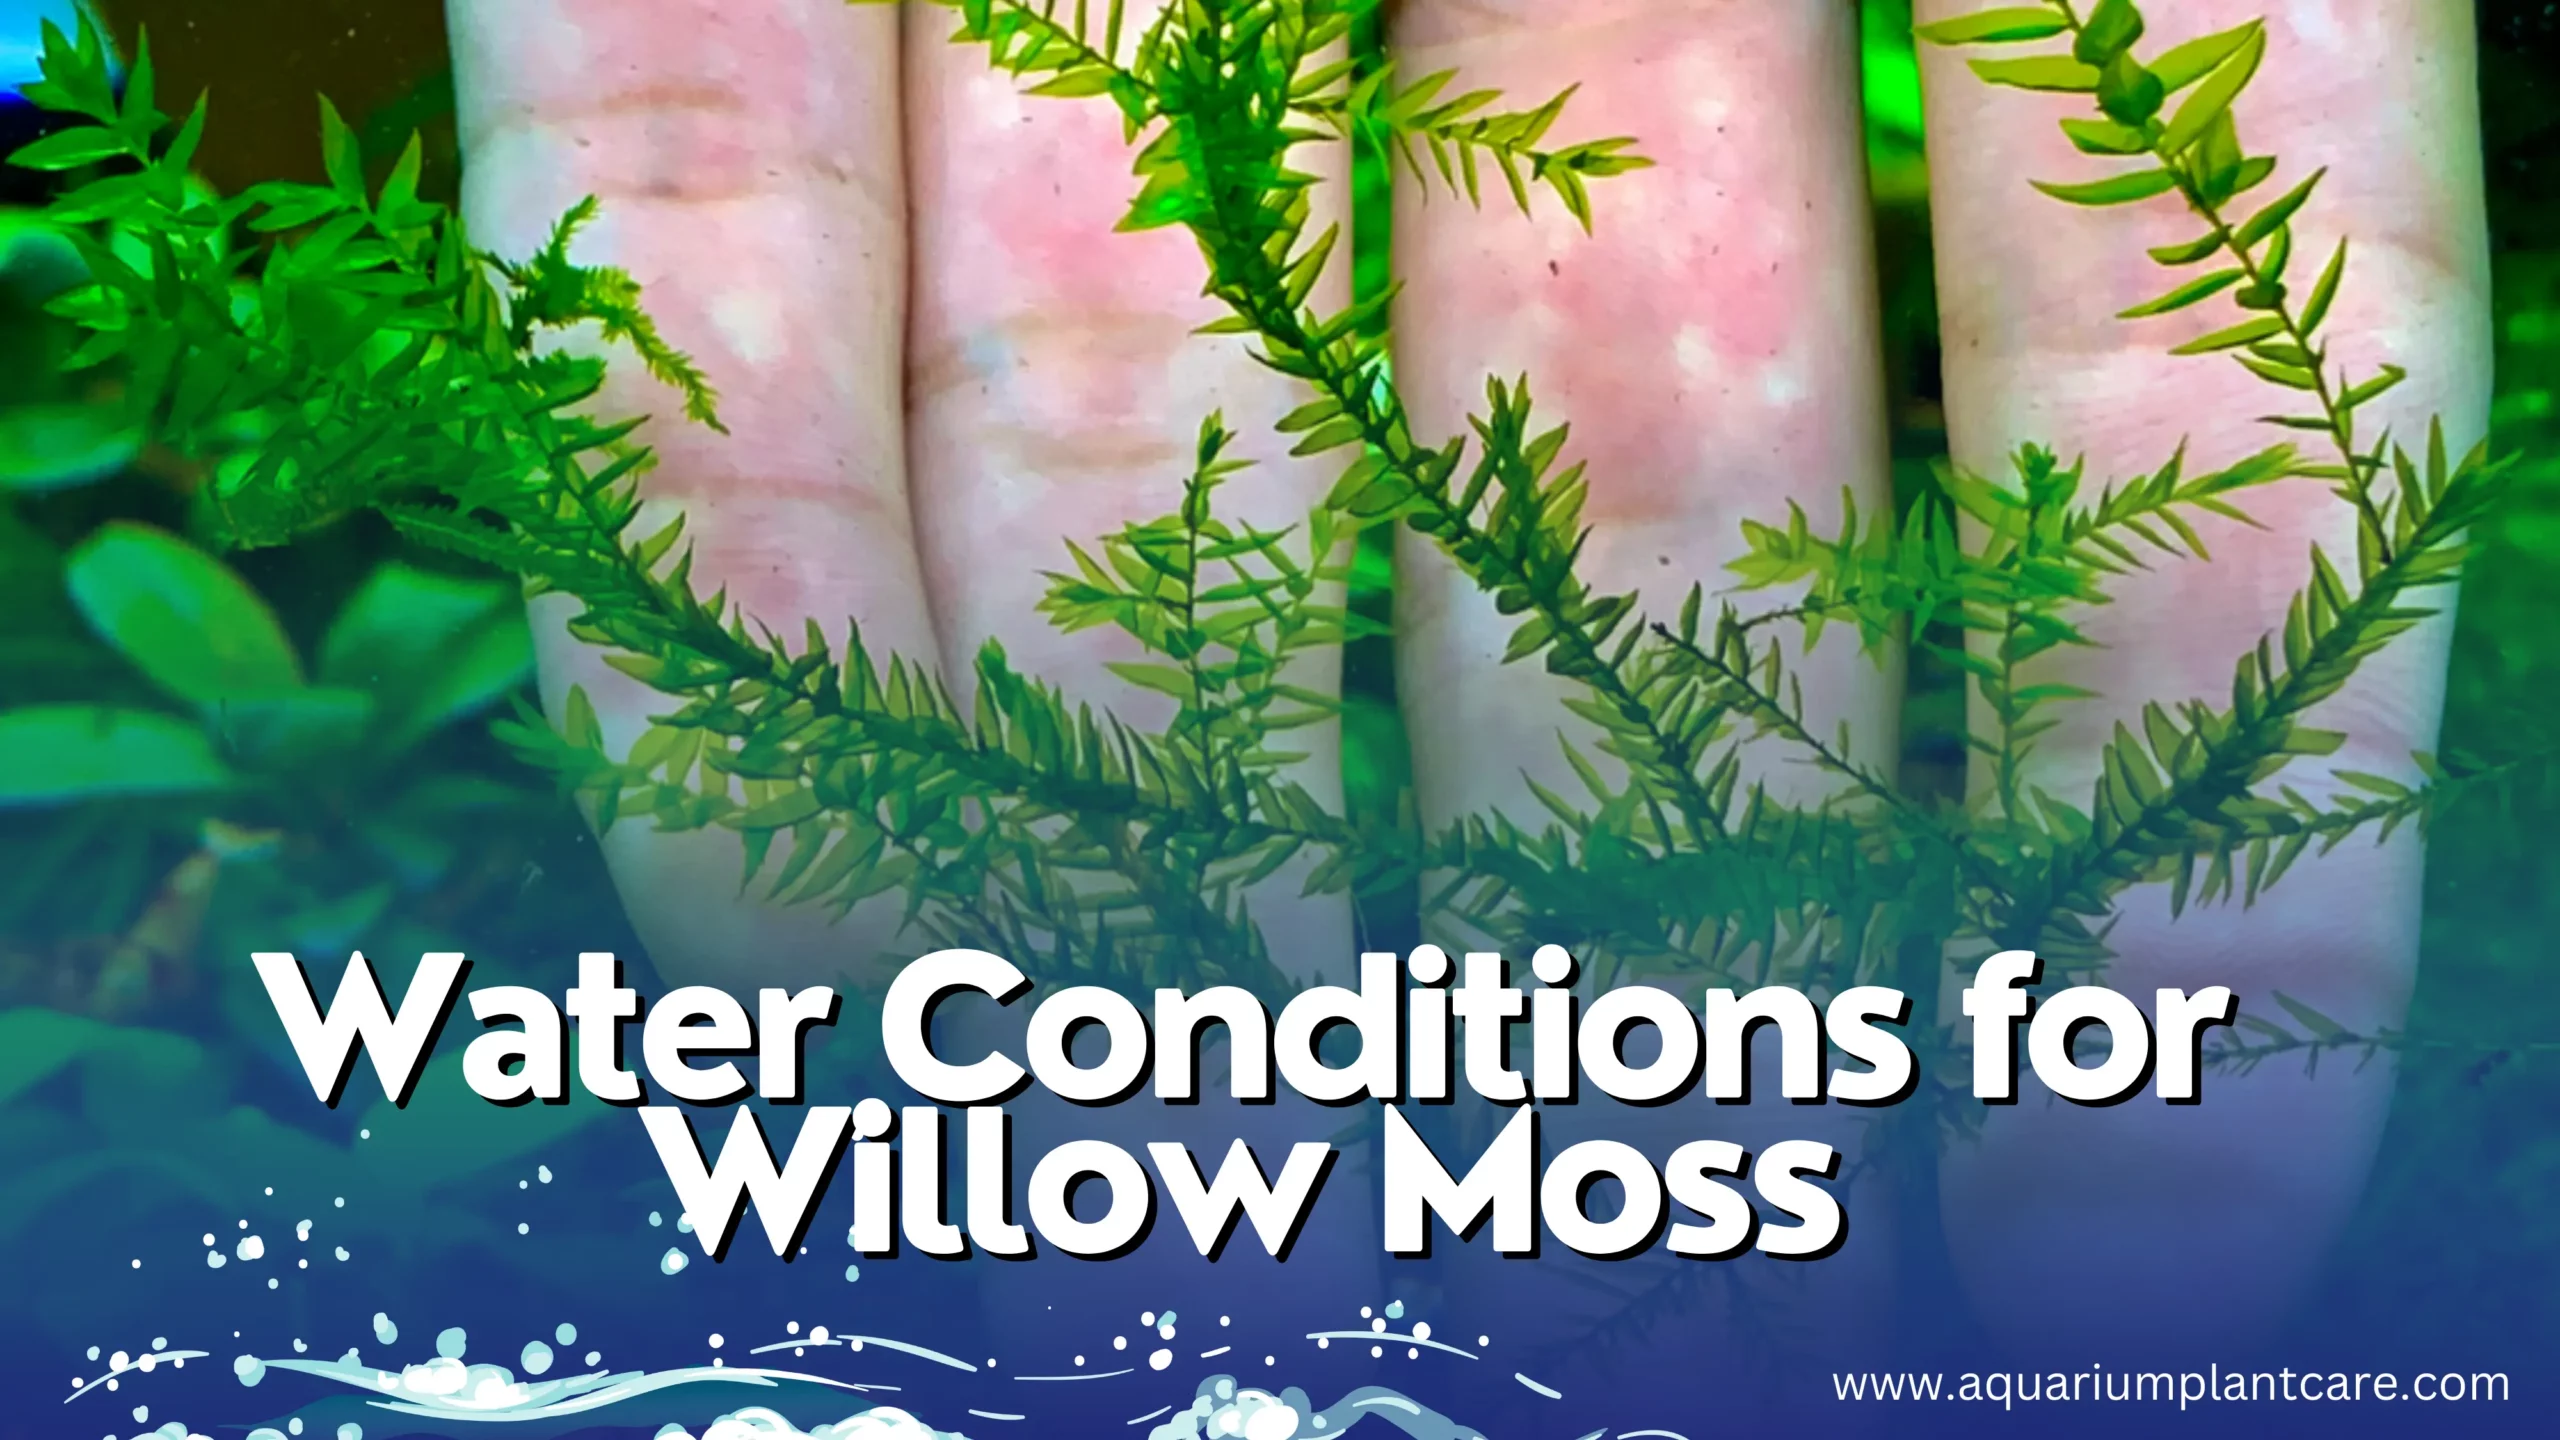 Water Conditions for Willow Moss